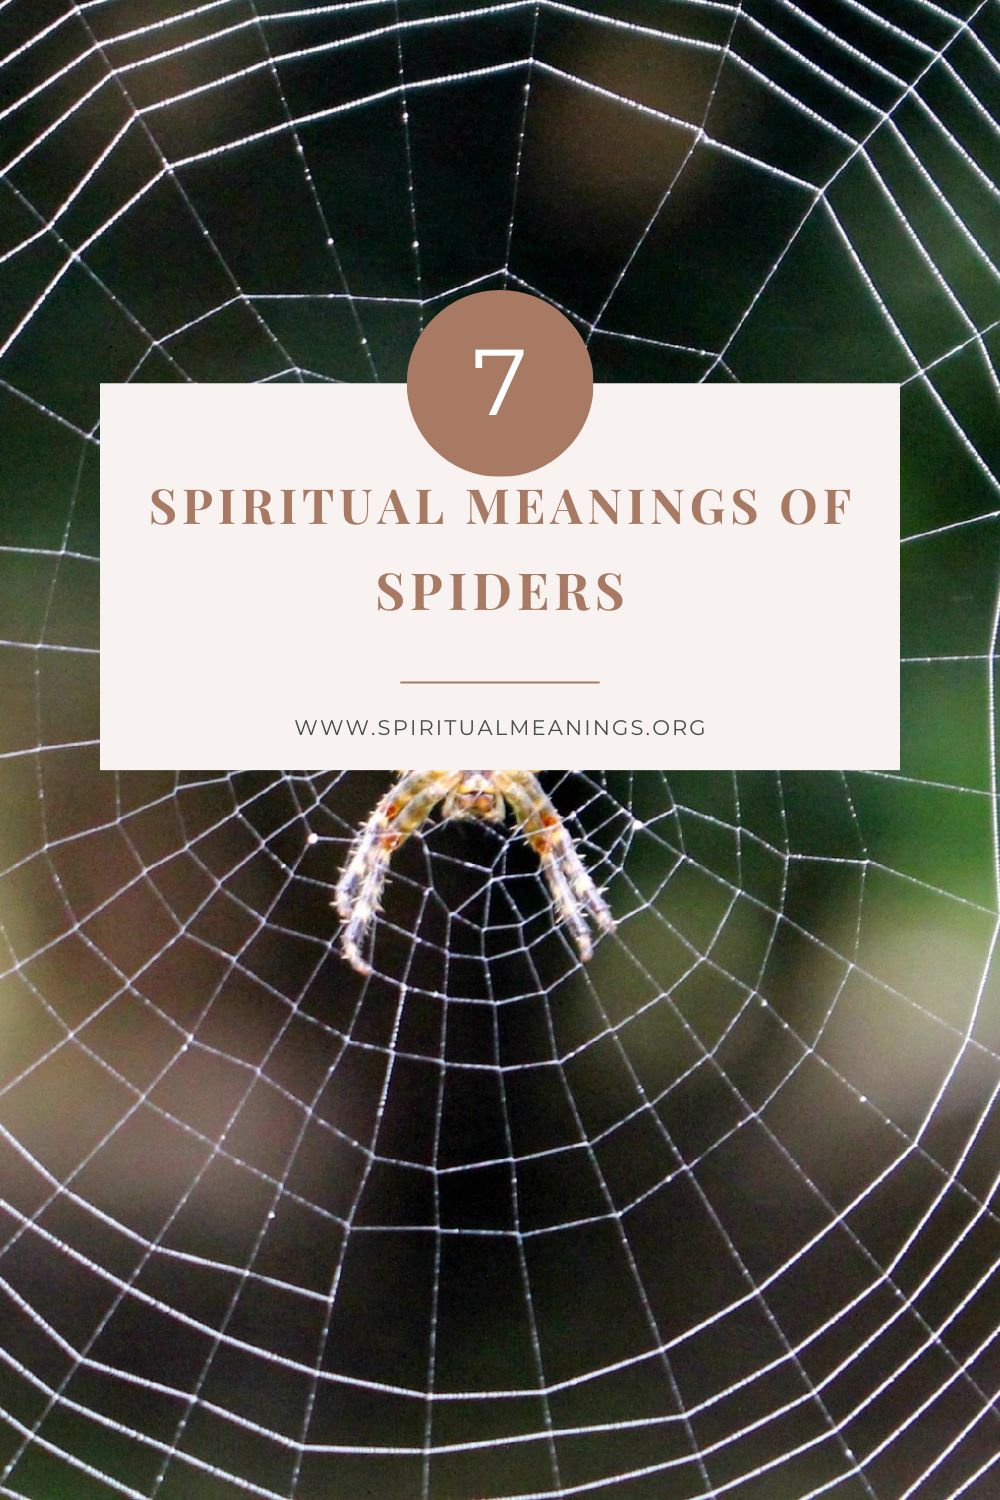 The Symbolism & Spiritual Meanings of Spiders